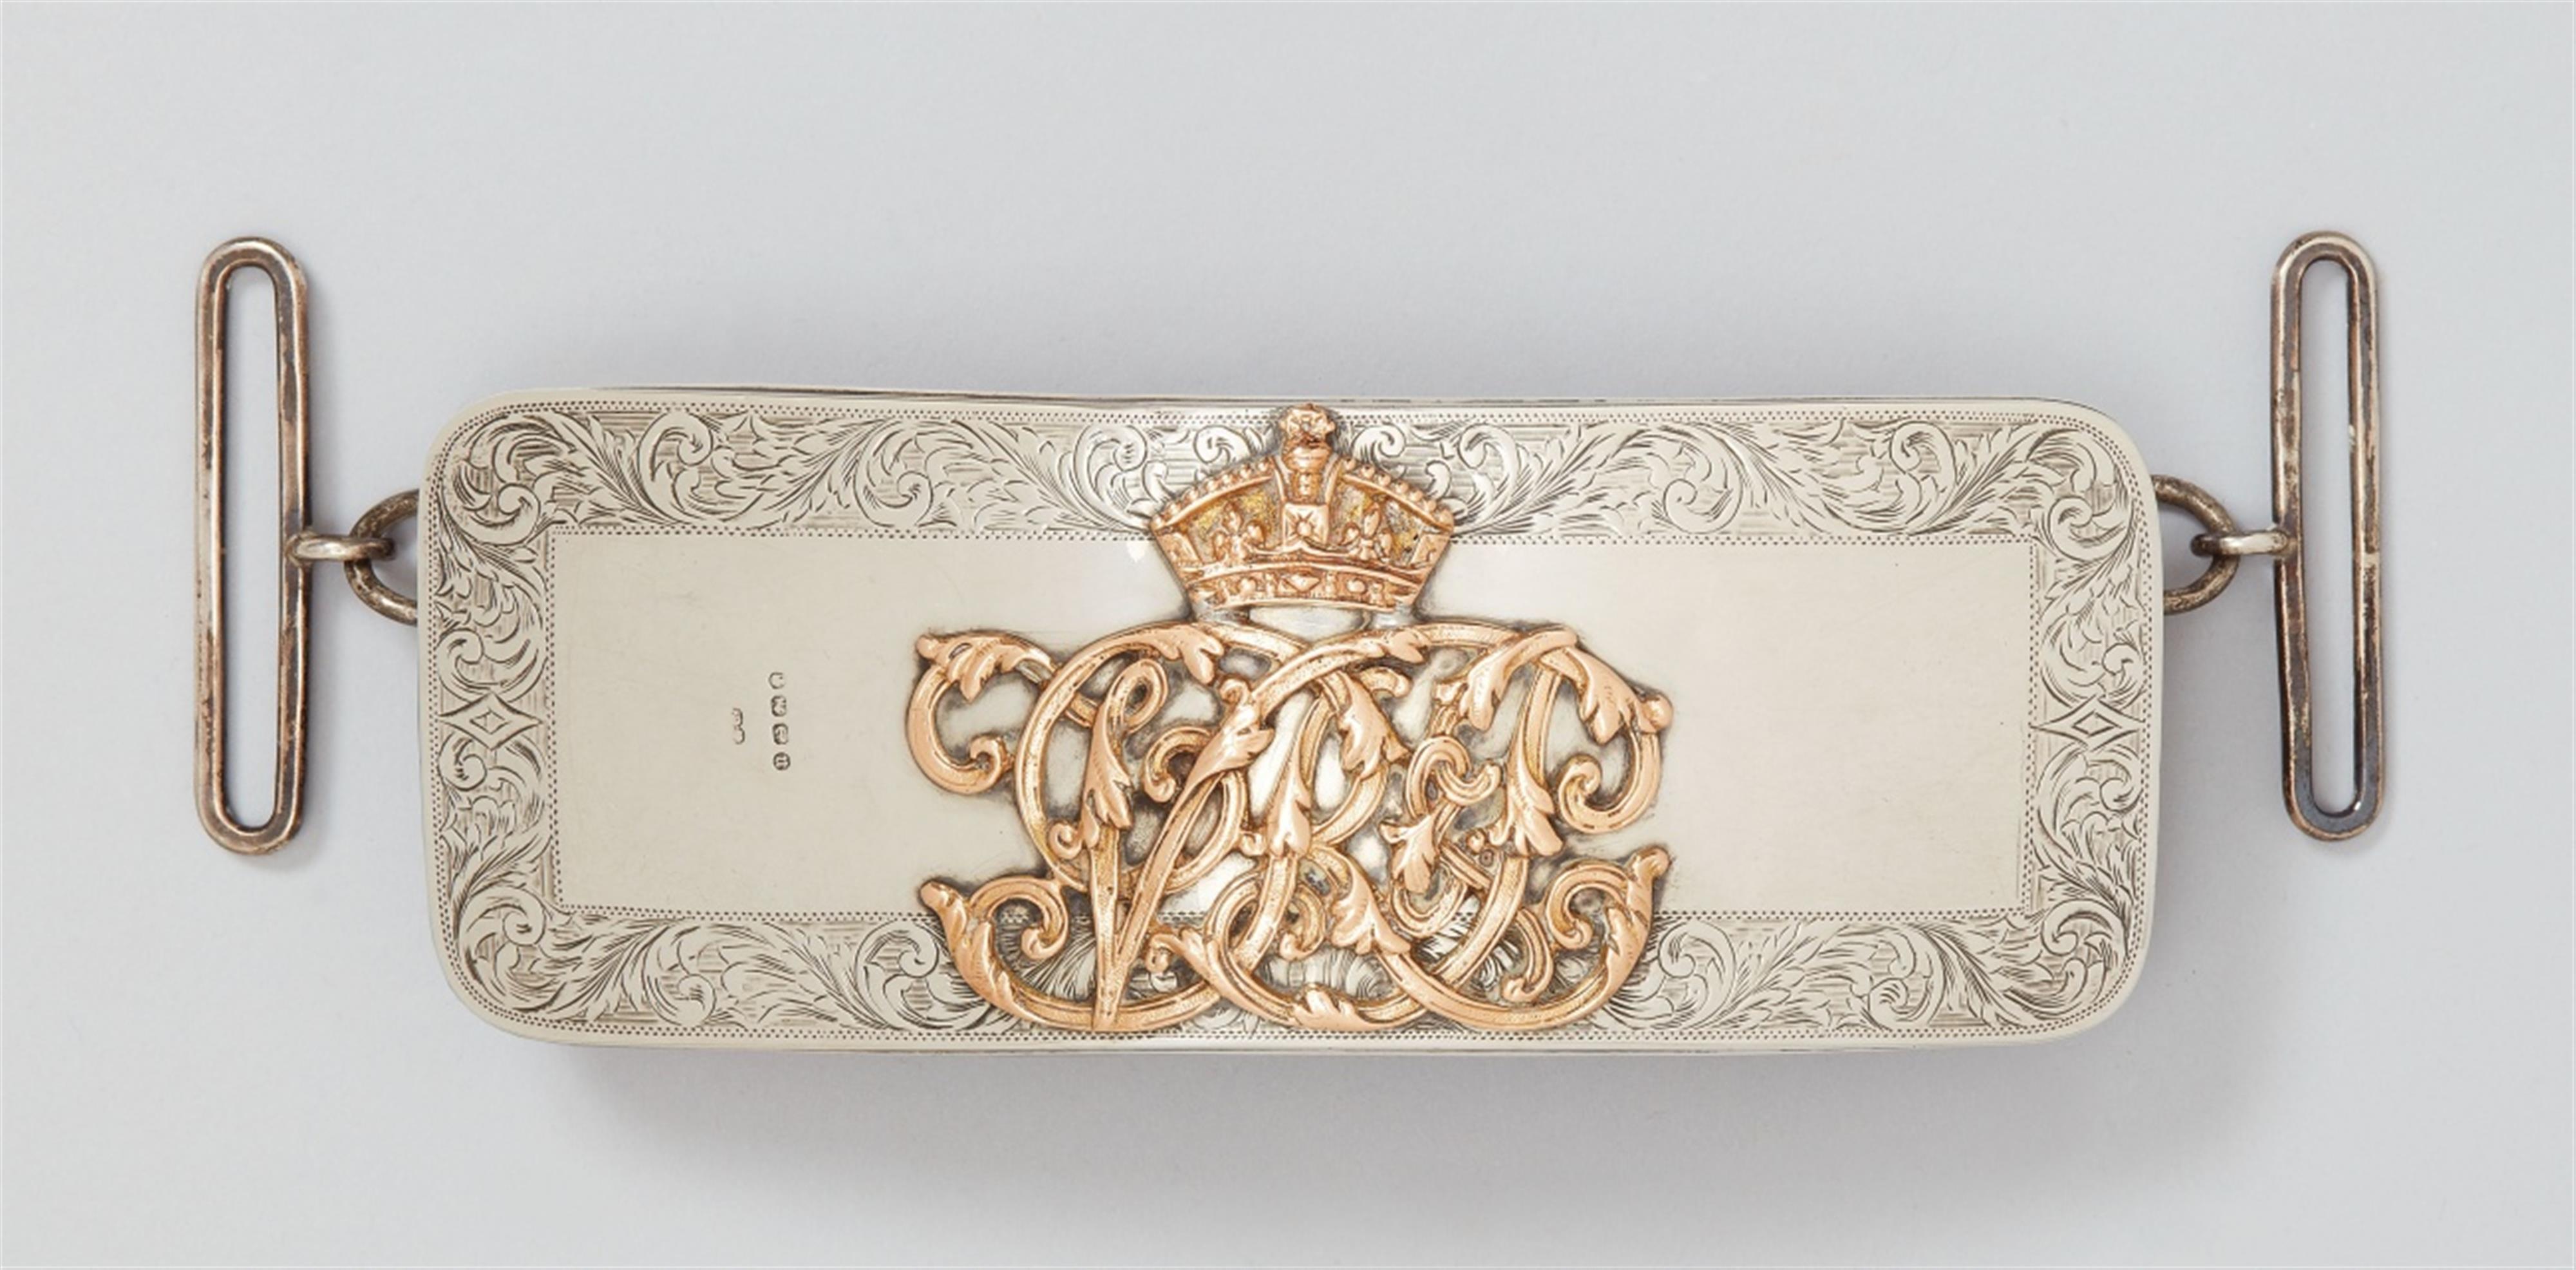 A Victorian Birmingham silver mounted pouch. Red leather applied with the relief monogram "VRI" beneath the British royal crown. Marks of Jennens & Com., 1887. - image-1